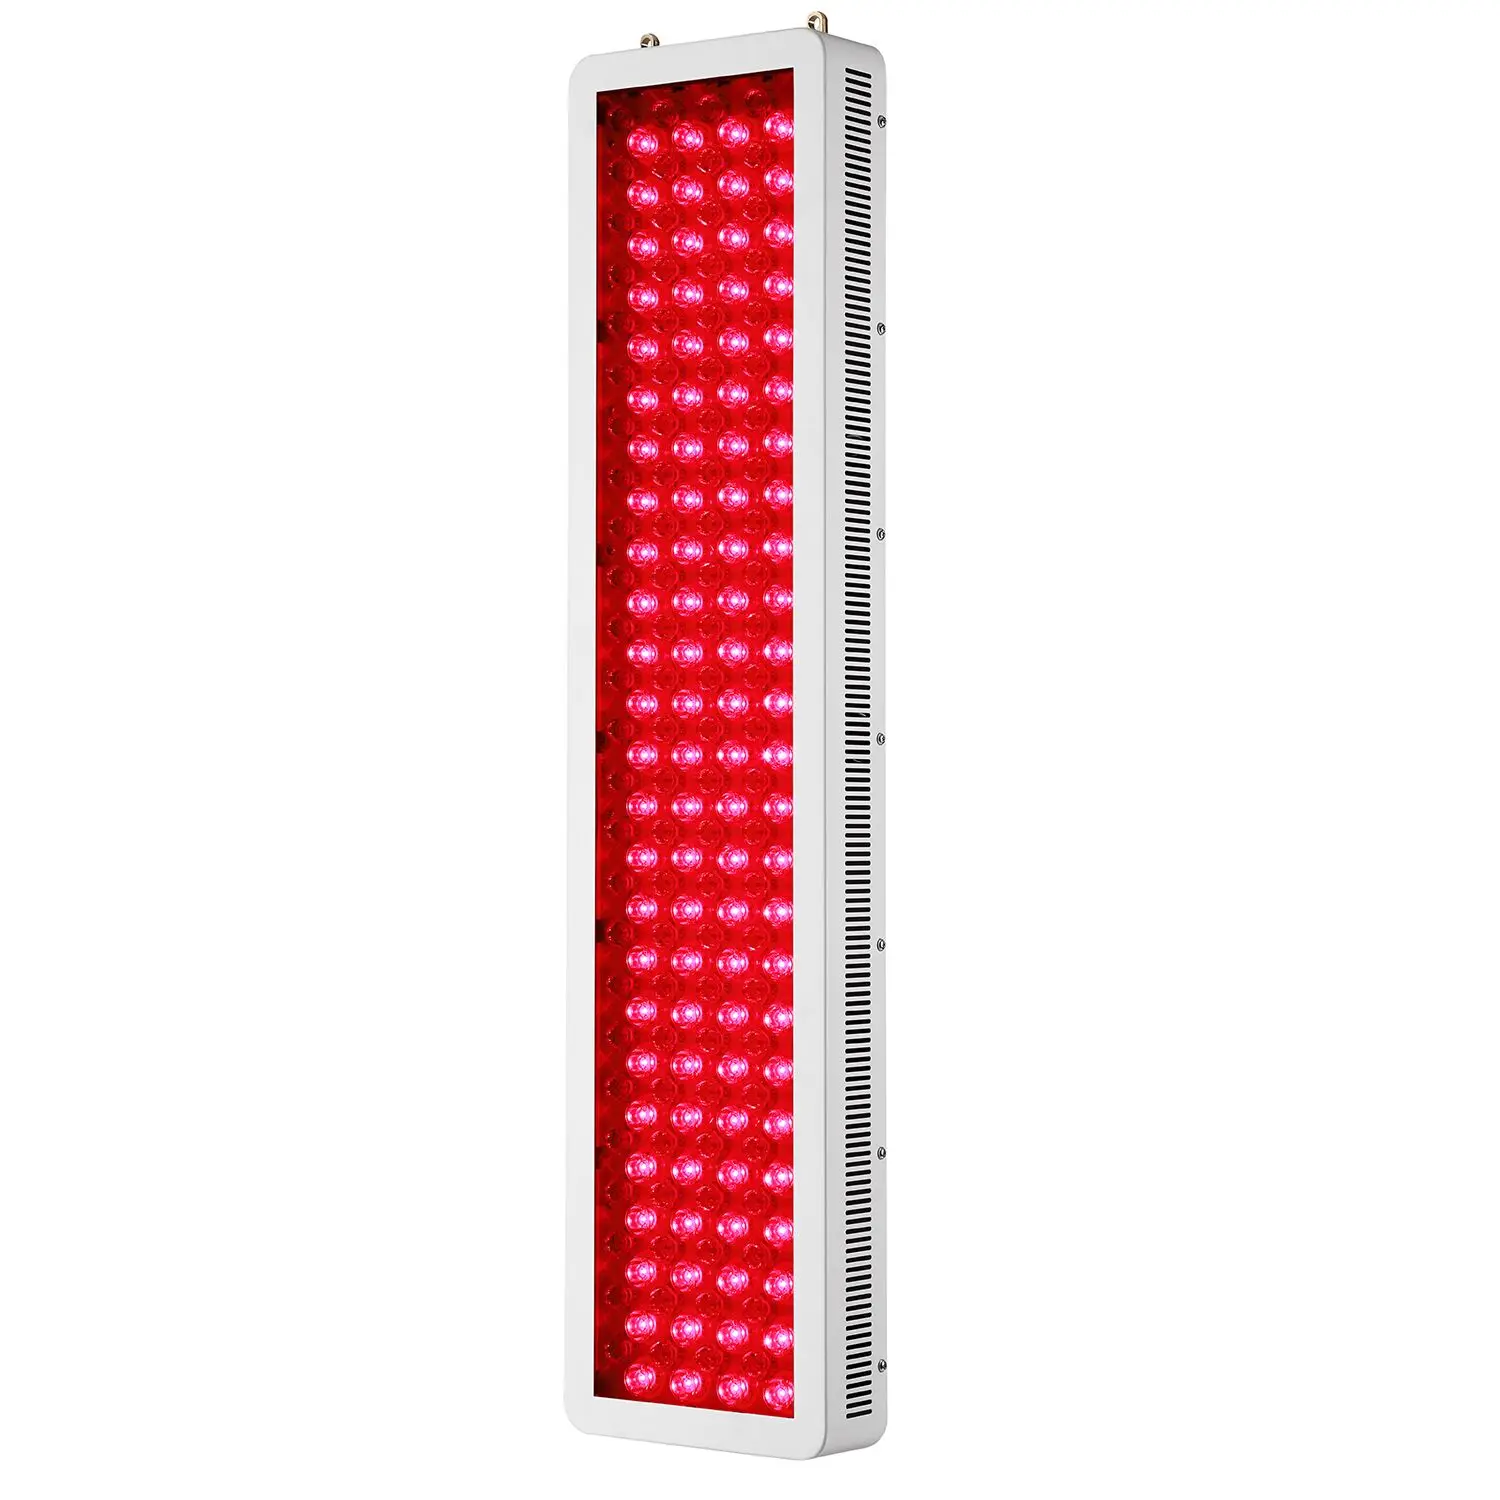 SGROW Hot items 1000W Skin Treatment Device Red Light Therapy Panels Full Body Led Infrared Light Therapy